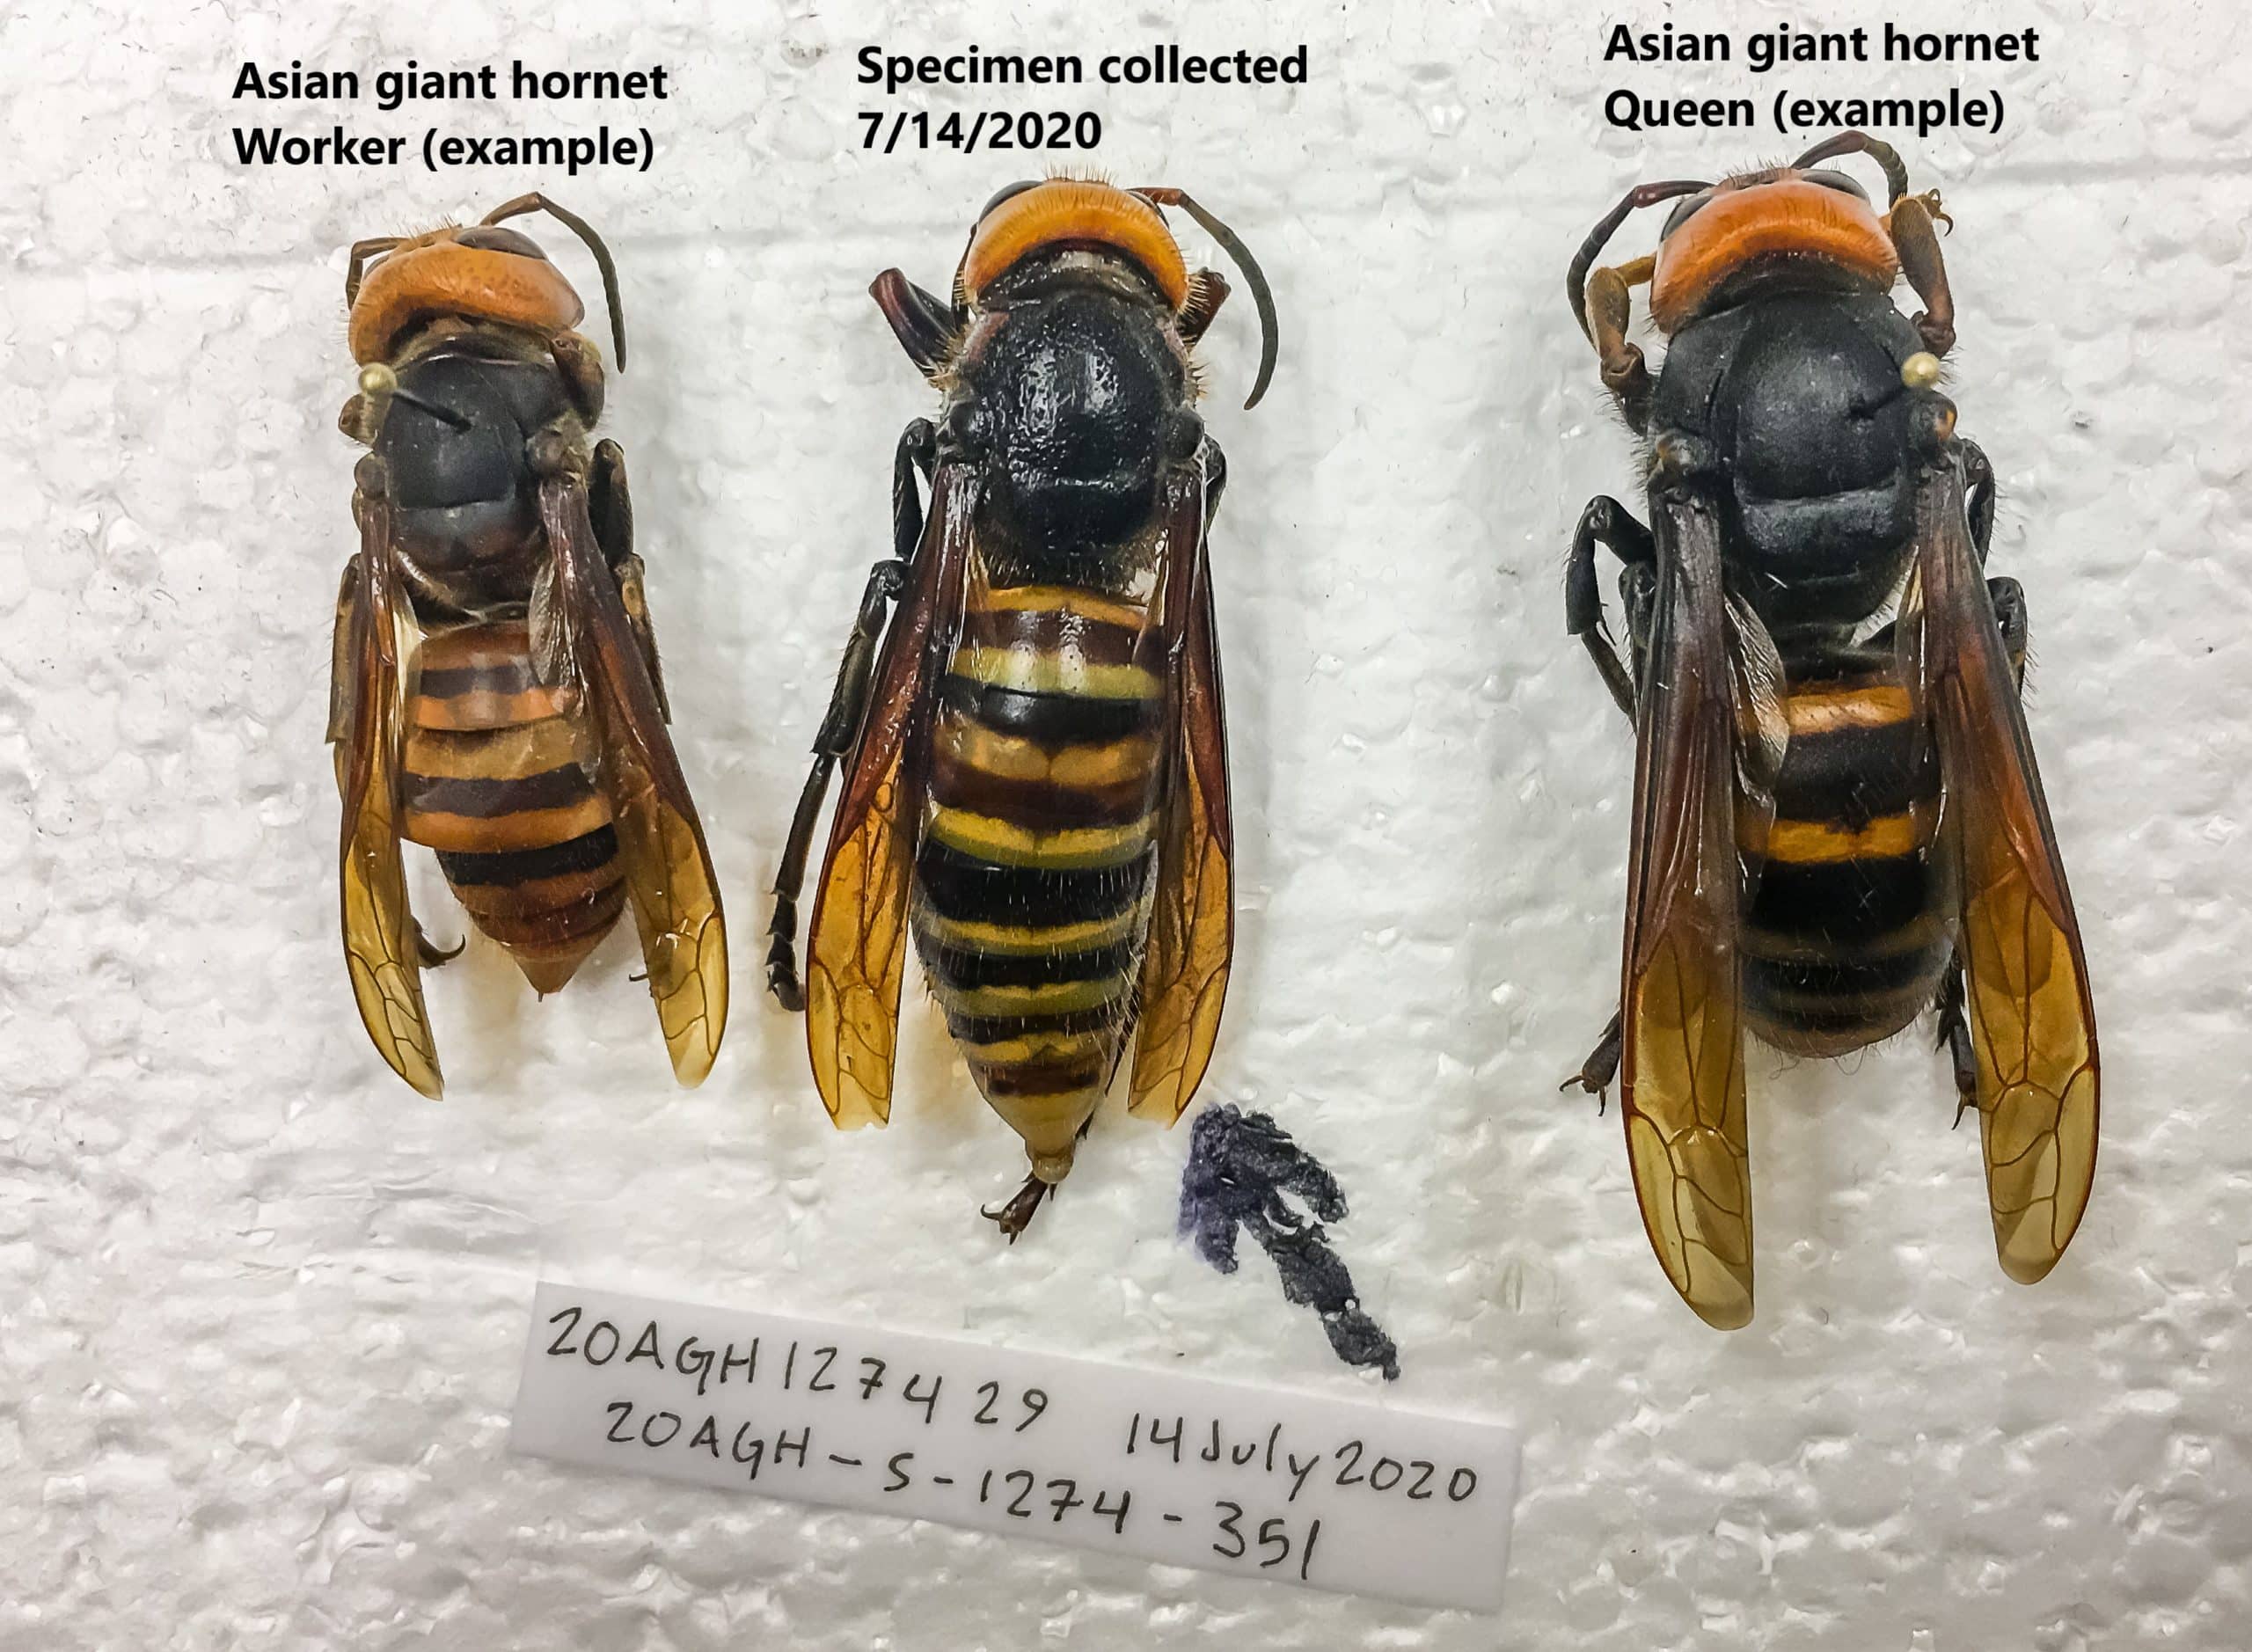 Northern giant hornet Queens: A Not-So Royal Spring Arrival